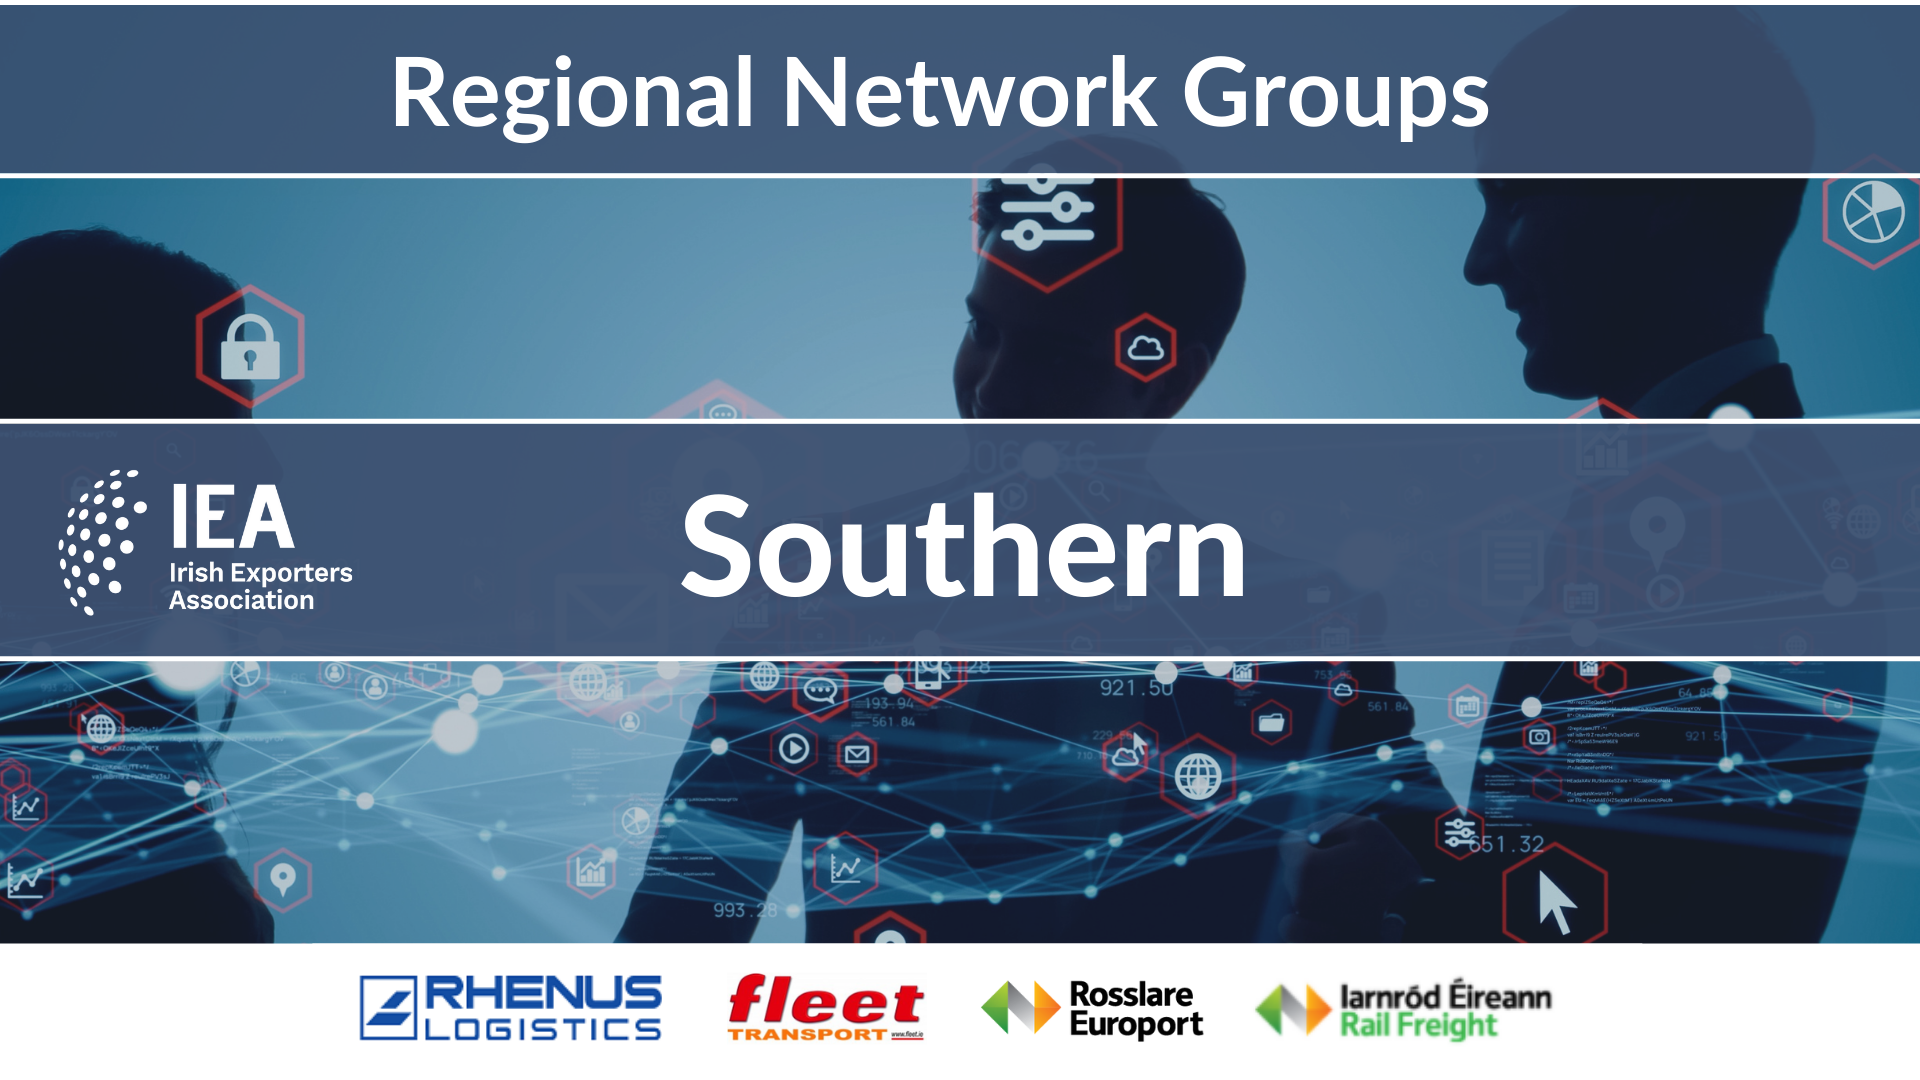 Southern Network Group meeting